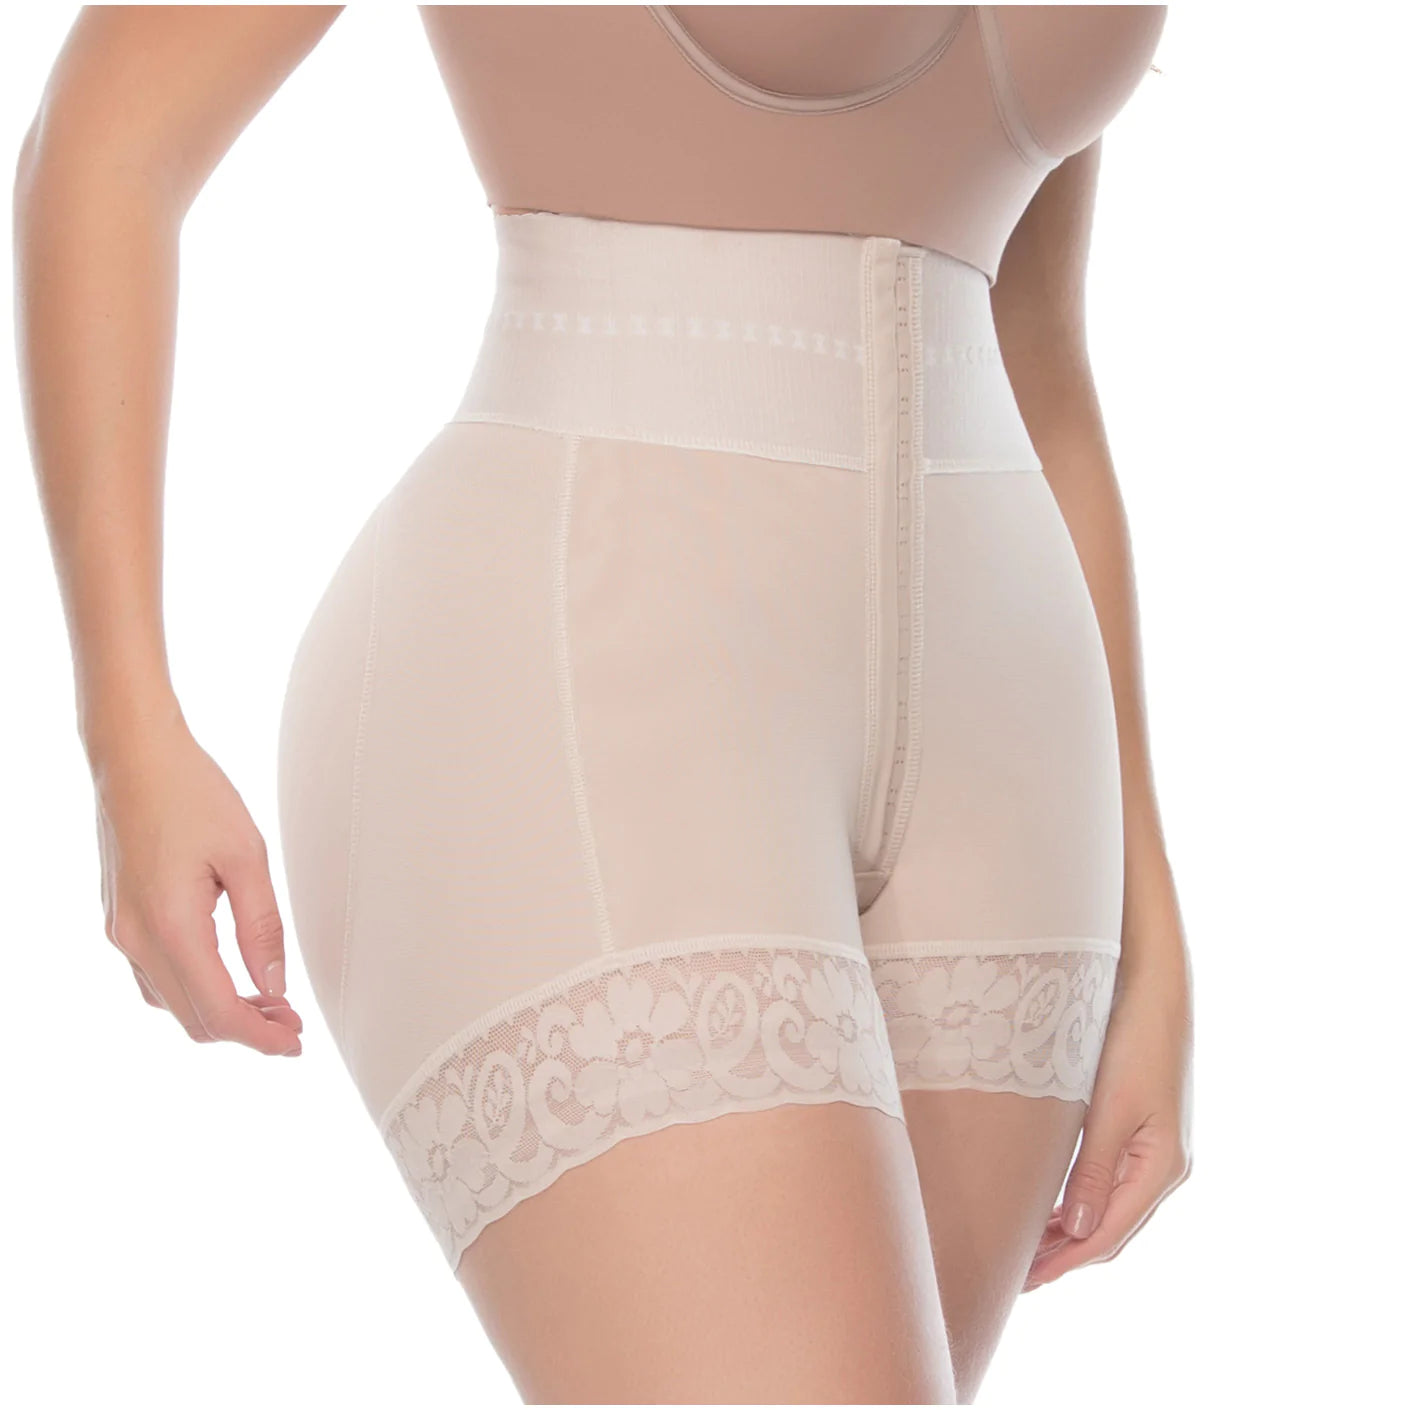 Butt Lifter Daily Use Shapewear, Post-surgical Postpartum Girdle, 23